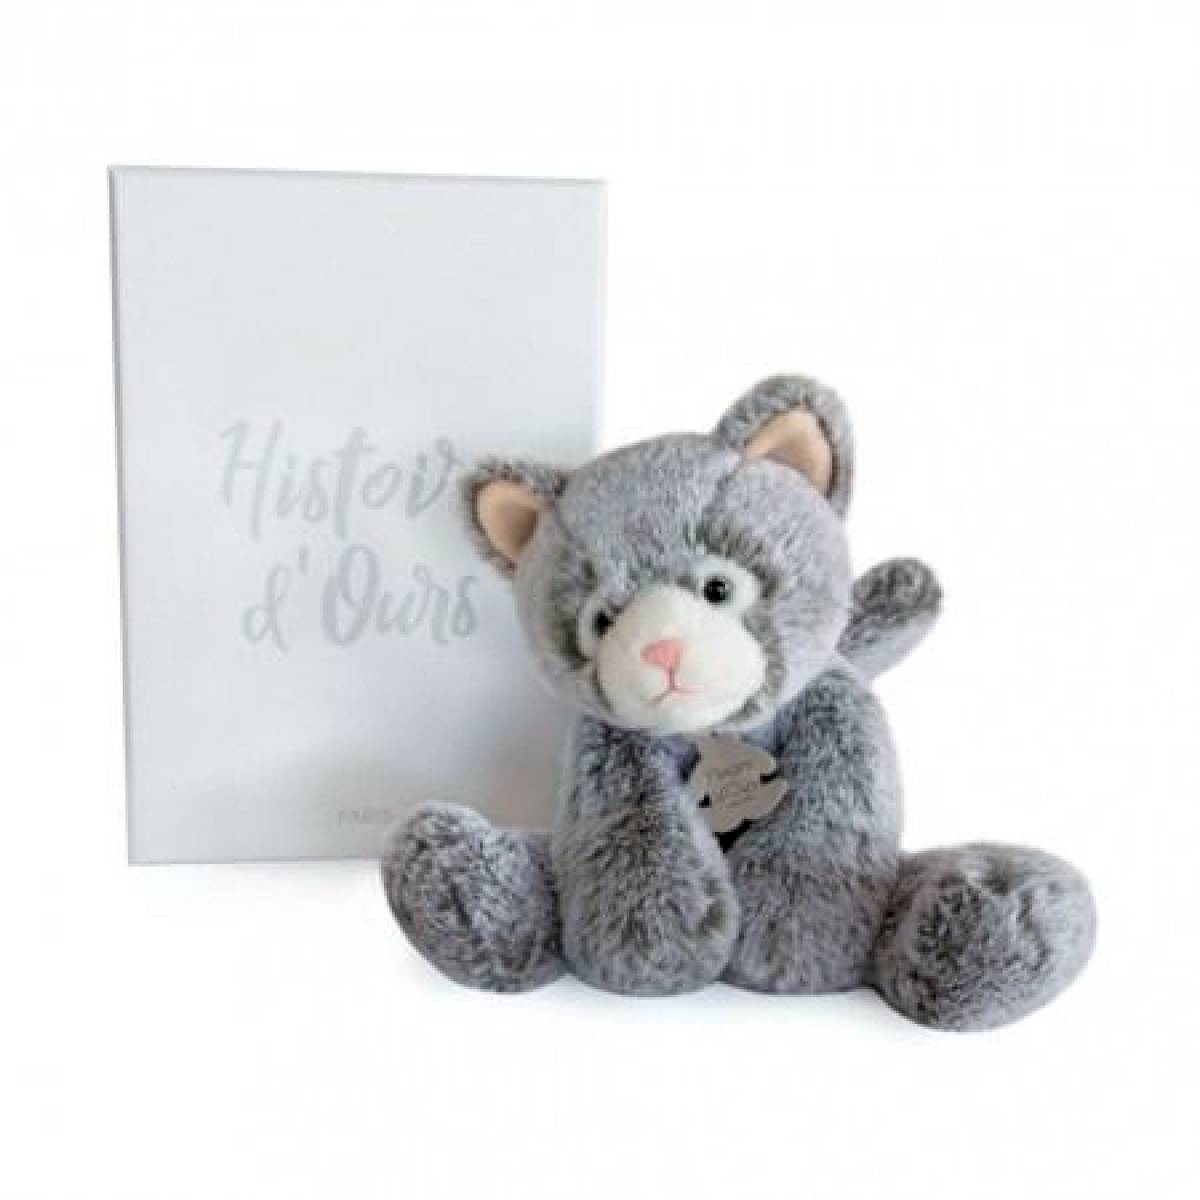  Peluche Chat Sweety Mousse 25 cm